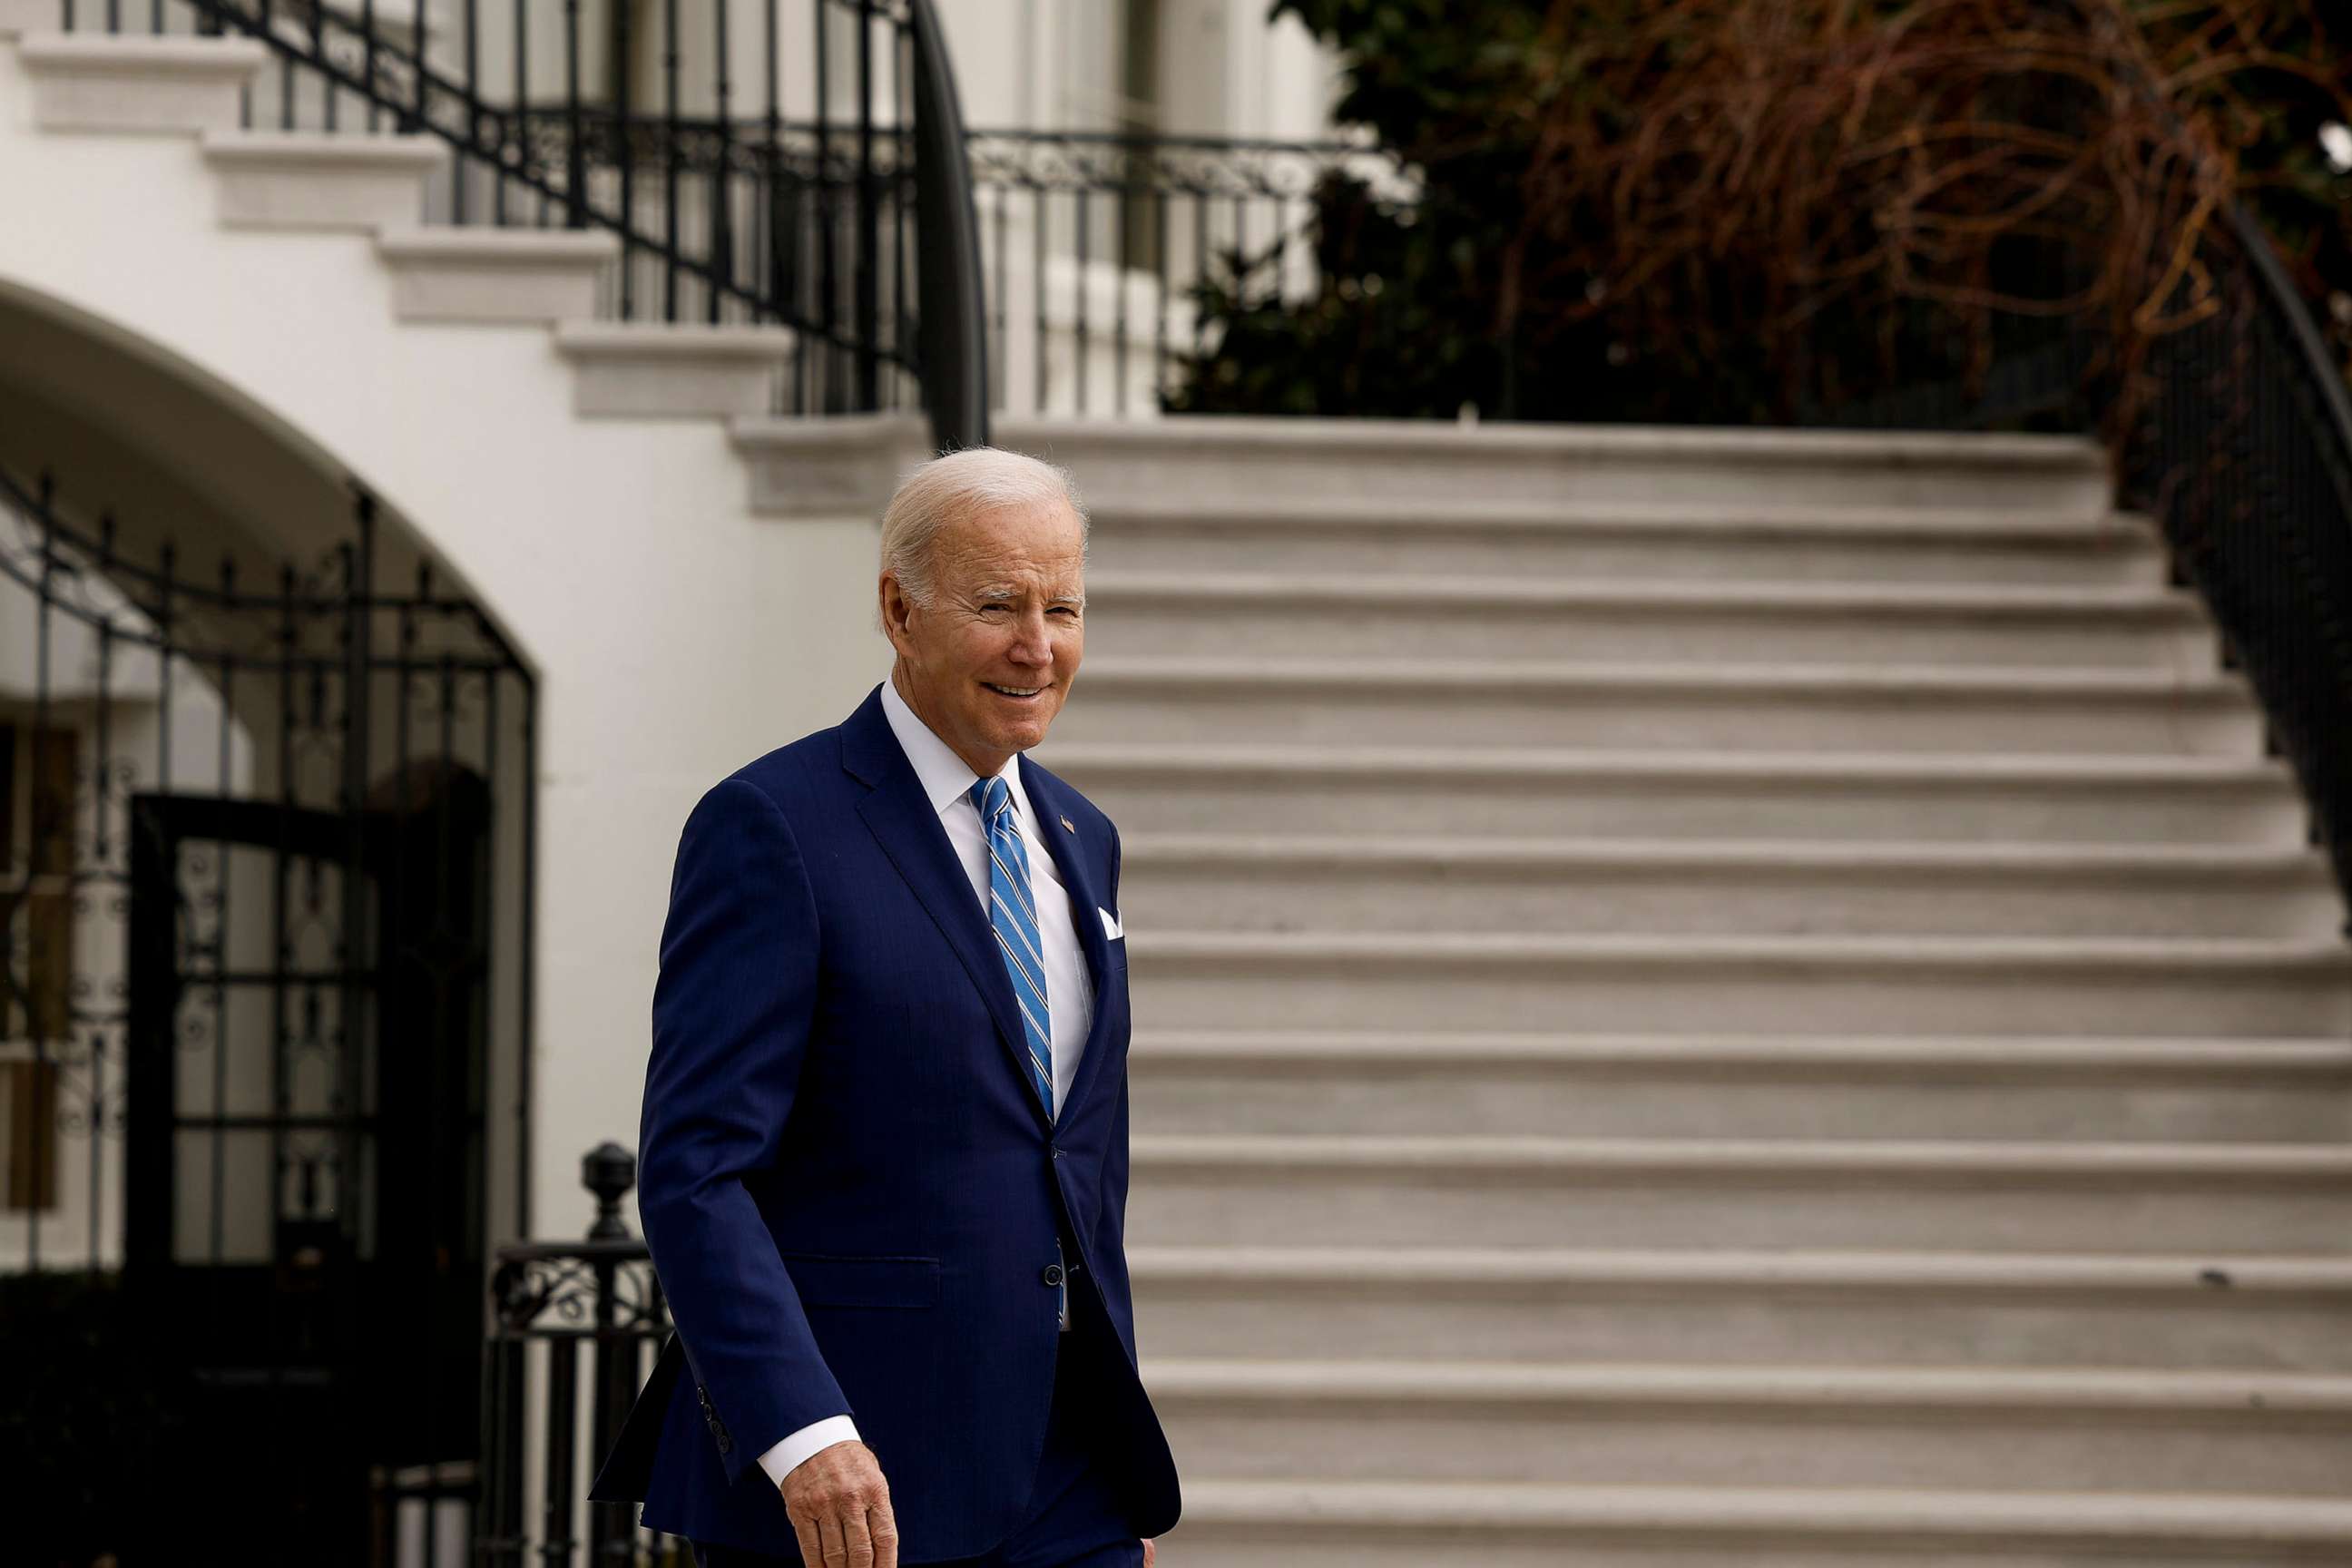 PHOTO: President Joe Biden walks to speak with reporters before boarding Marine One on the South Lawn of the White House, Feb. 9, 2023, in Washington.